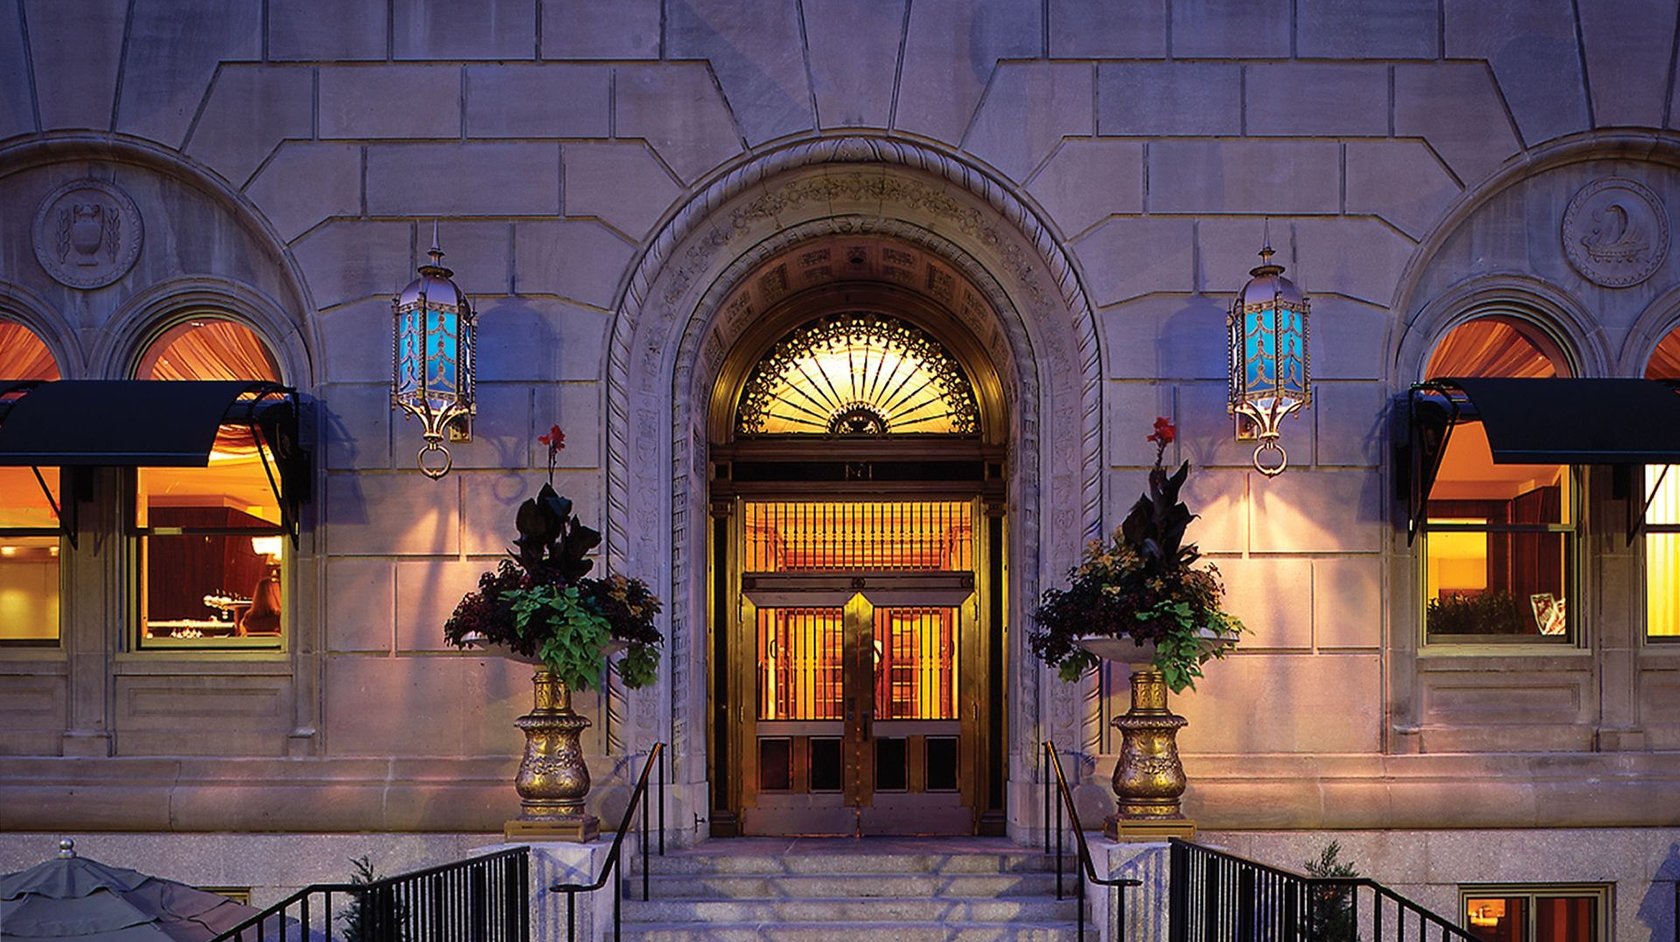 Entrance to Hotel AKA Back Bay apartment building in Boston with vintage glass doors and two vases 